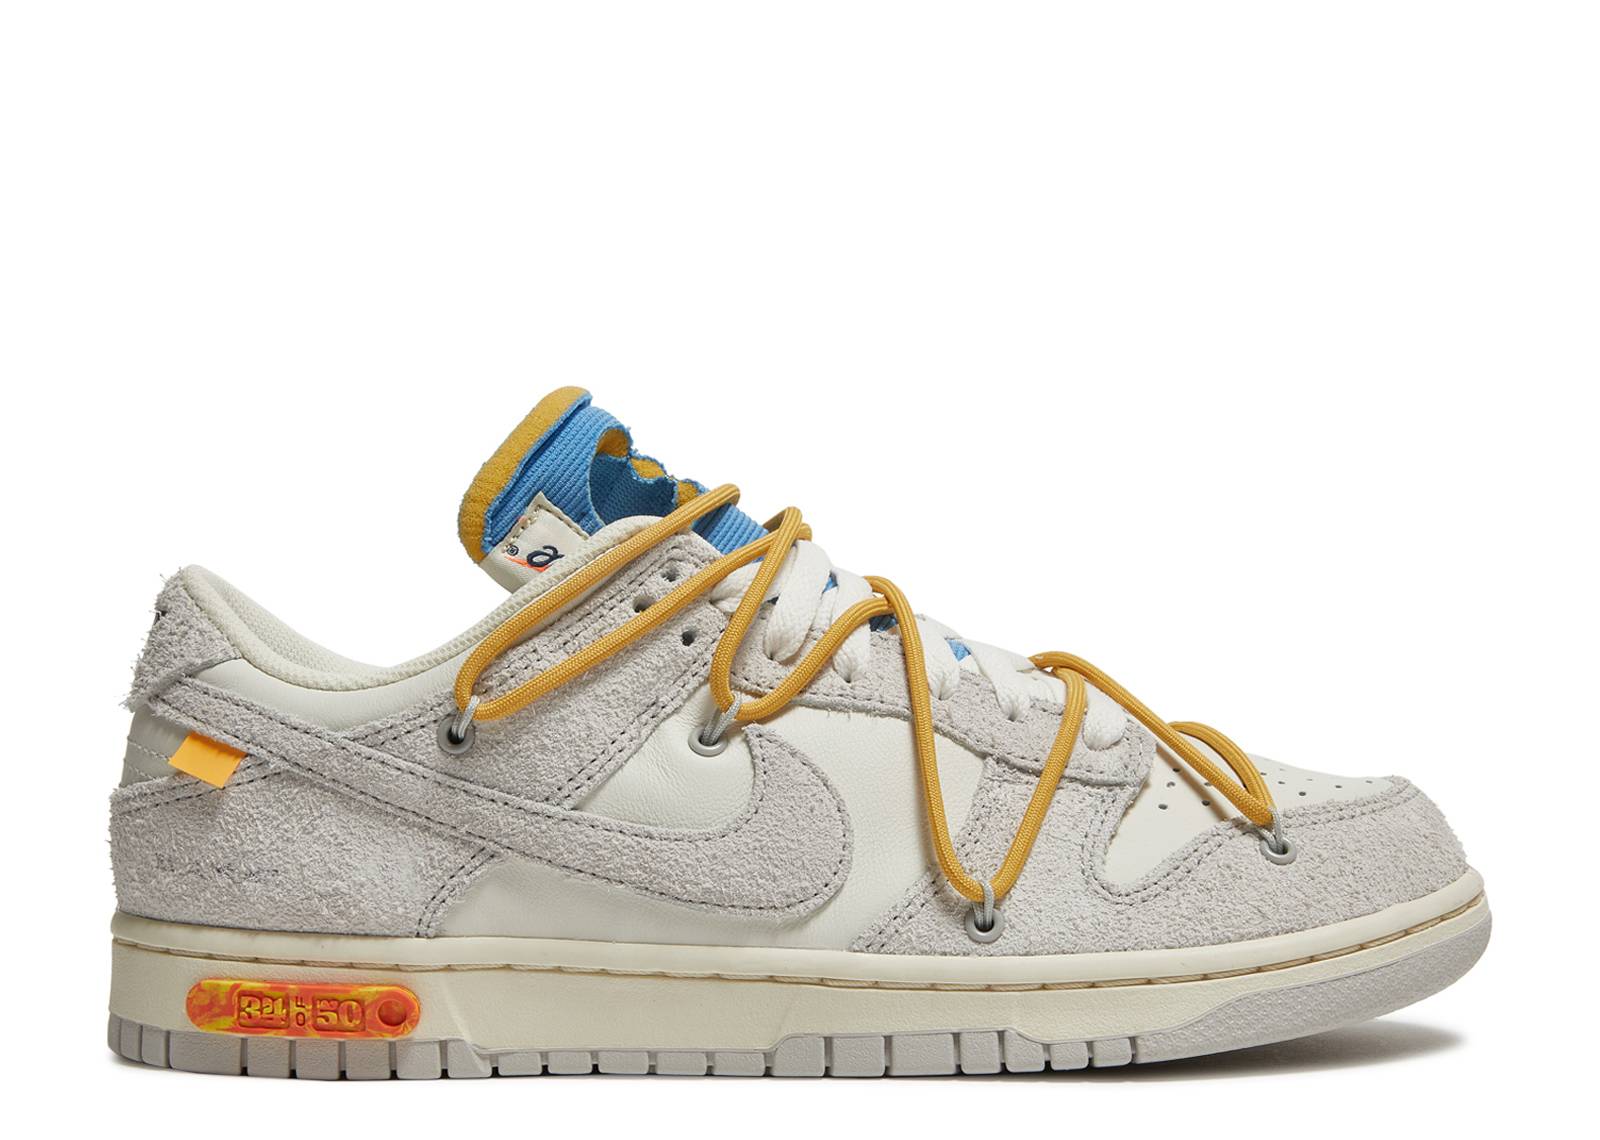 Off-White x Dunk Low Lot 34 of 50